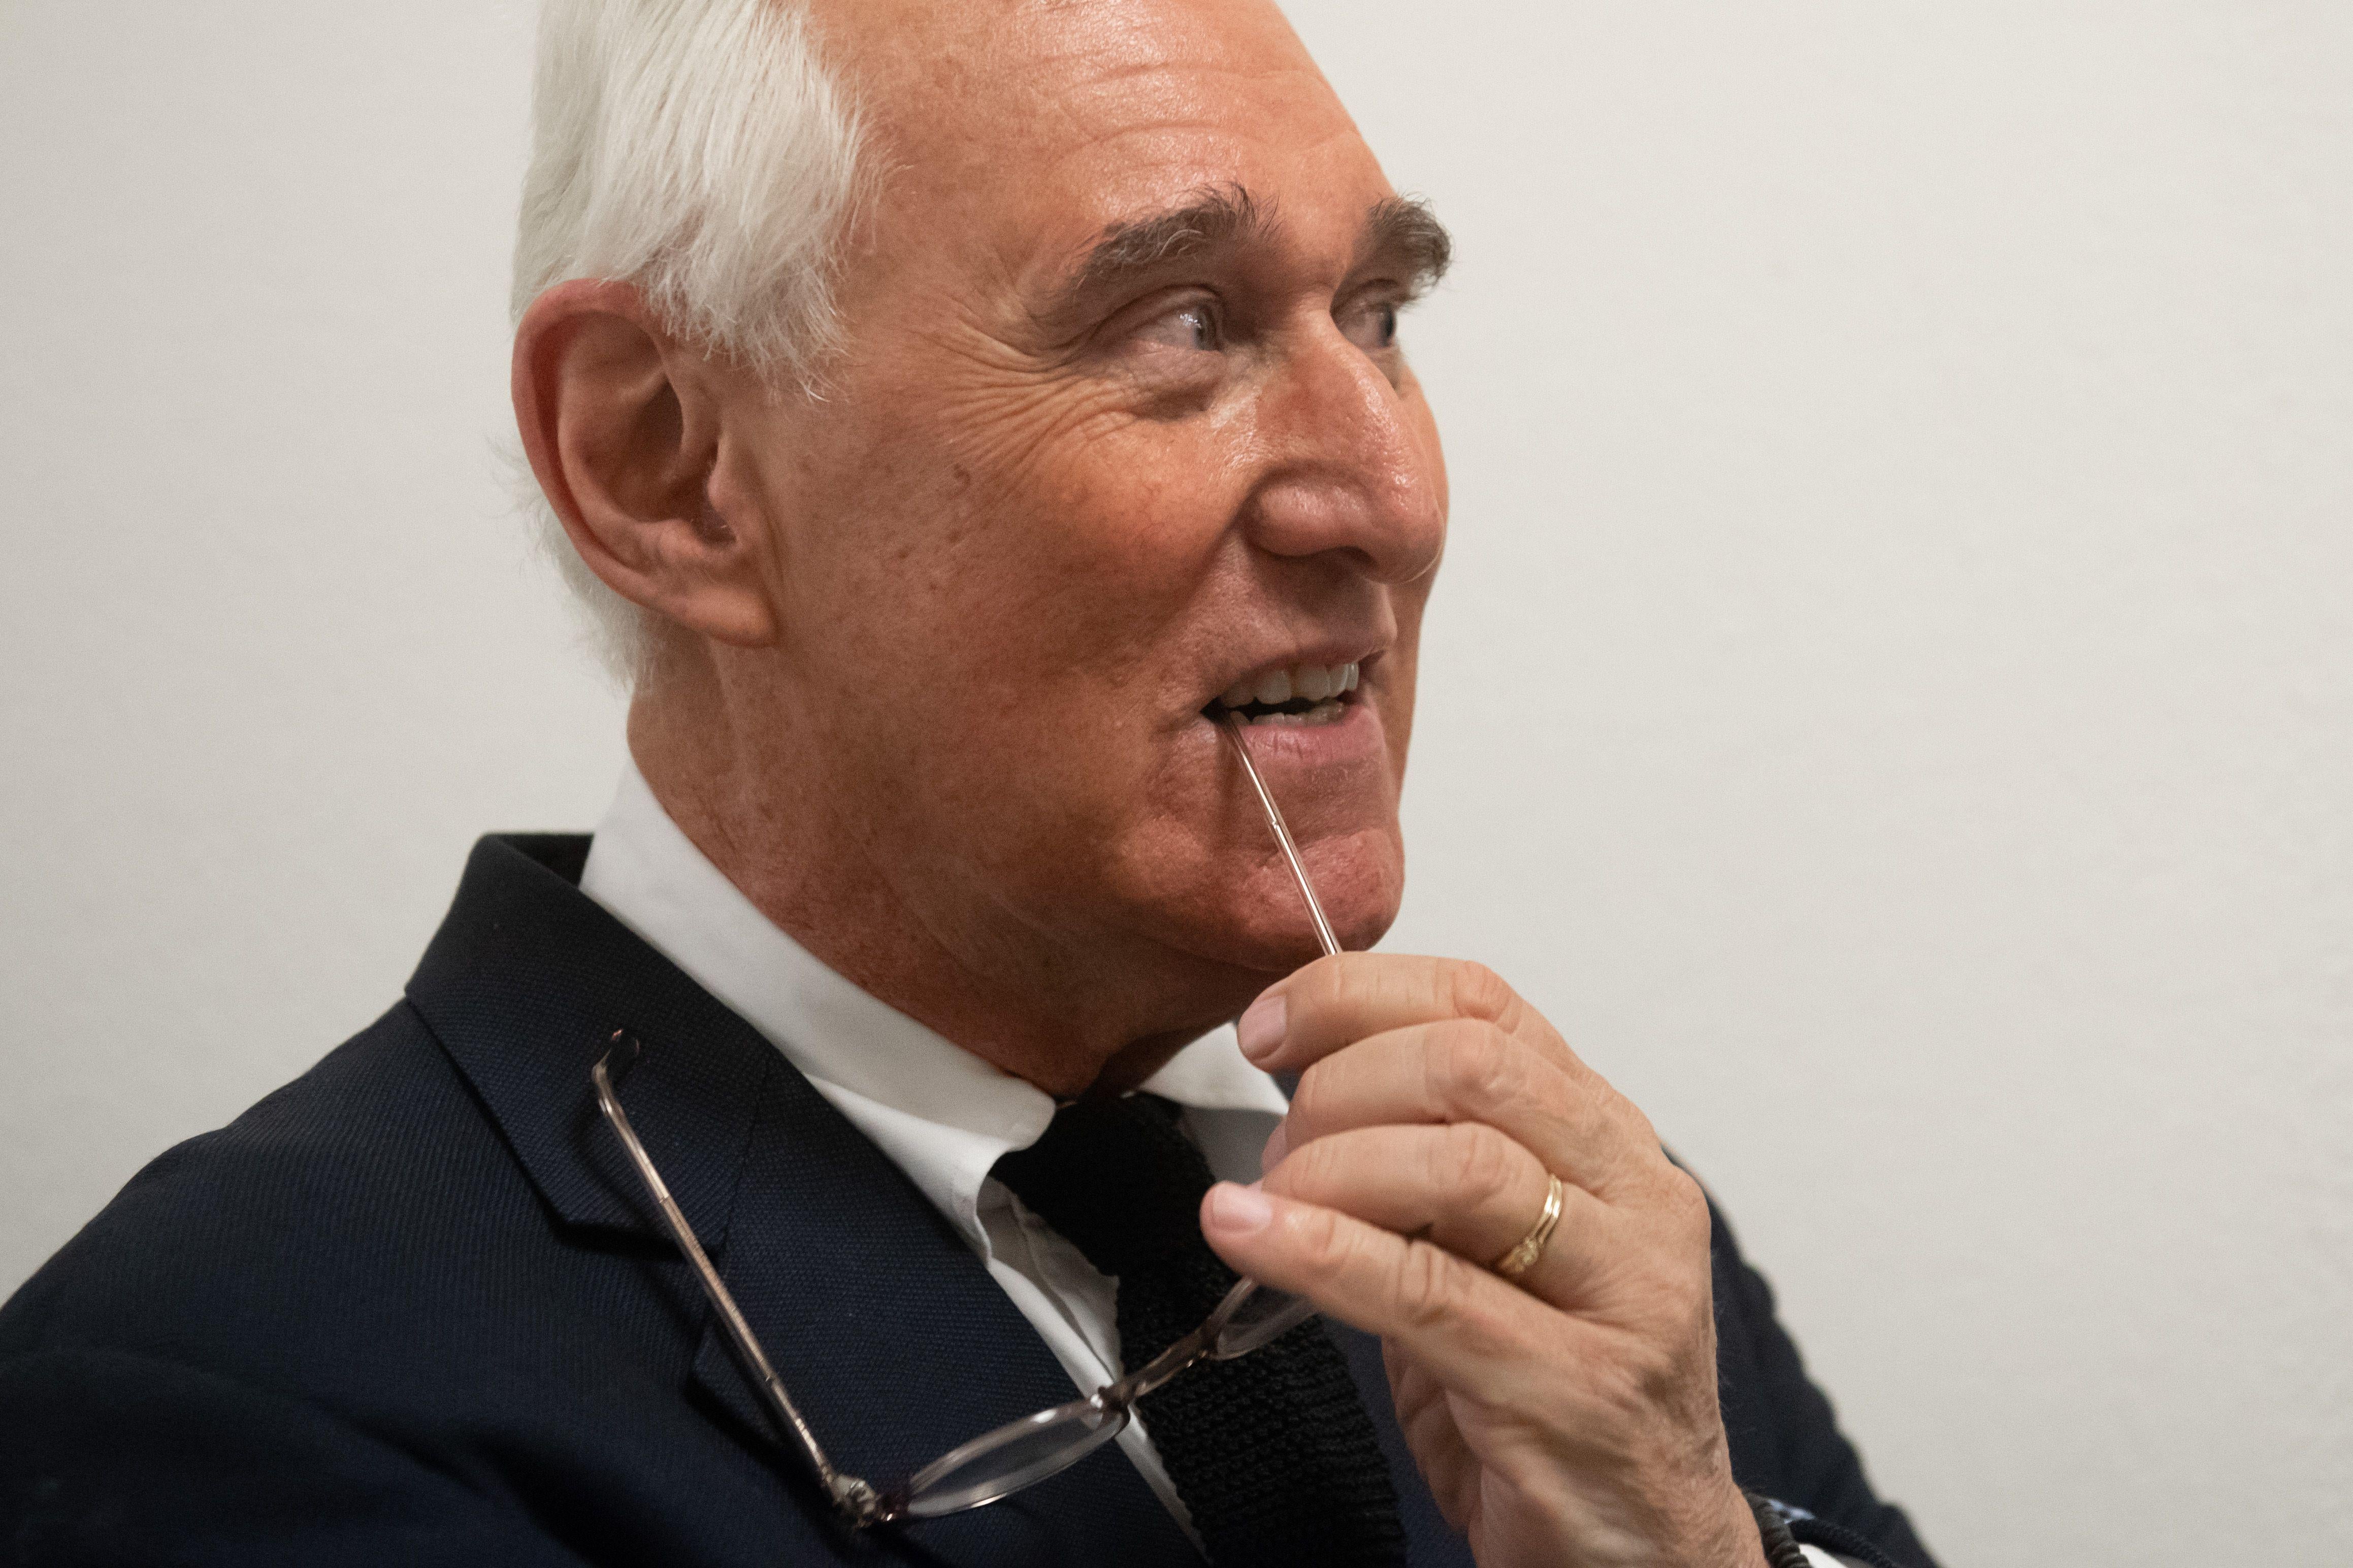 Roger Stone with a stem of his glasses in his mouth